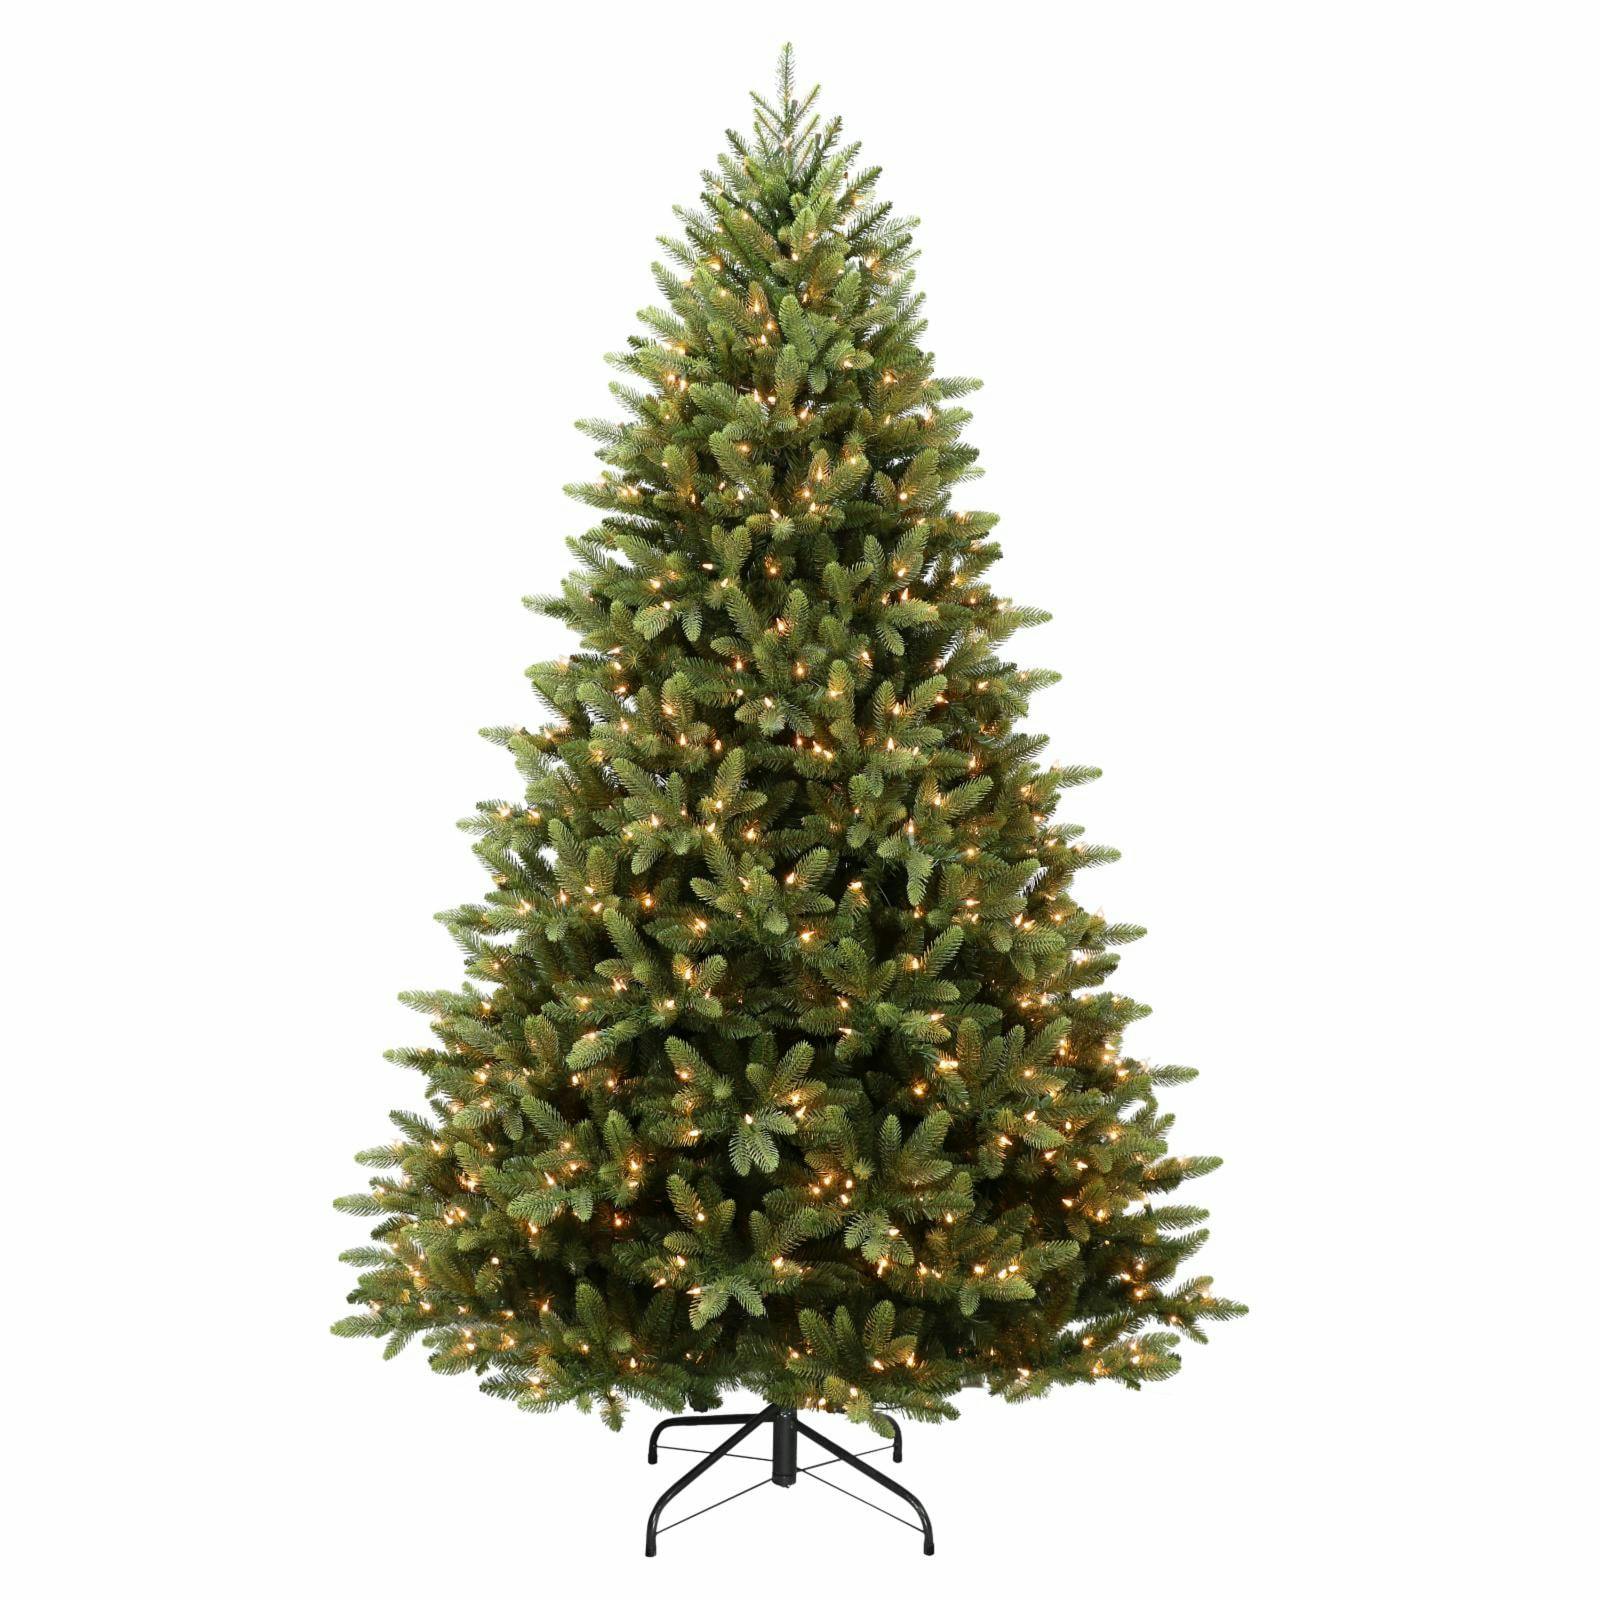 Winter White Spruce 7.5' Pre-Lit Potted Christmas Tree with Clear Lights